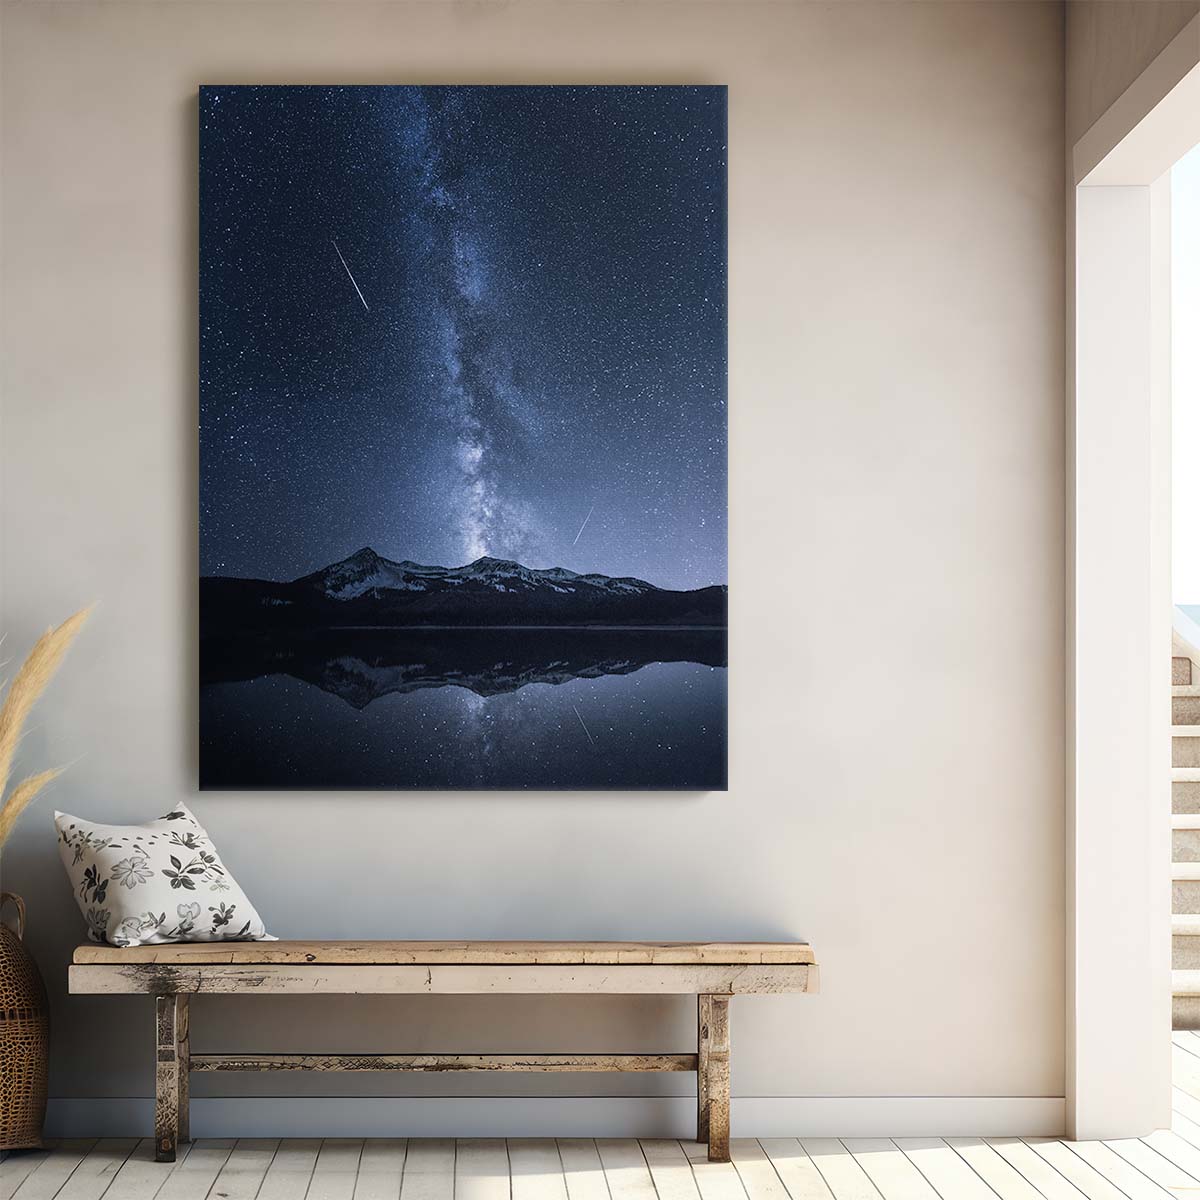 Starry Night Reflection Majestic Colorado Lake Astrophotography Art by Luxuriance Designs, made in USA